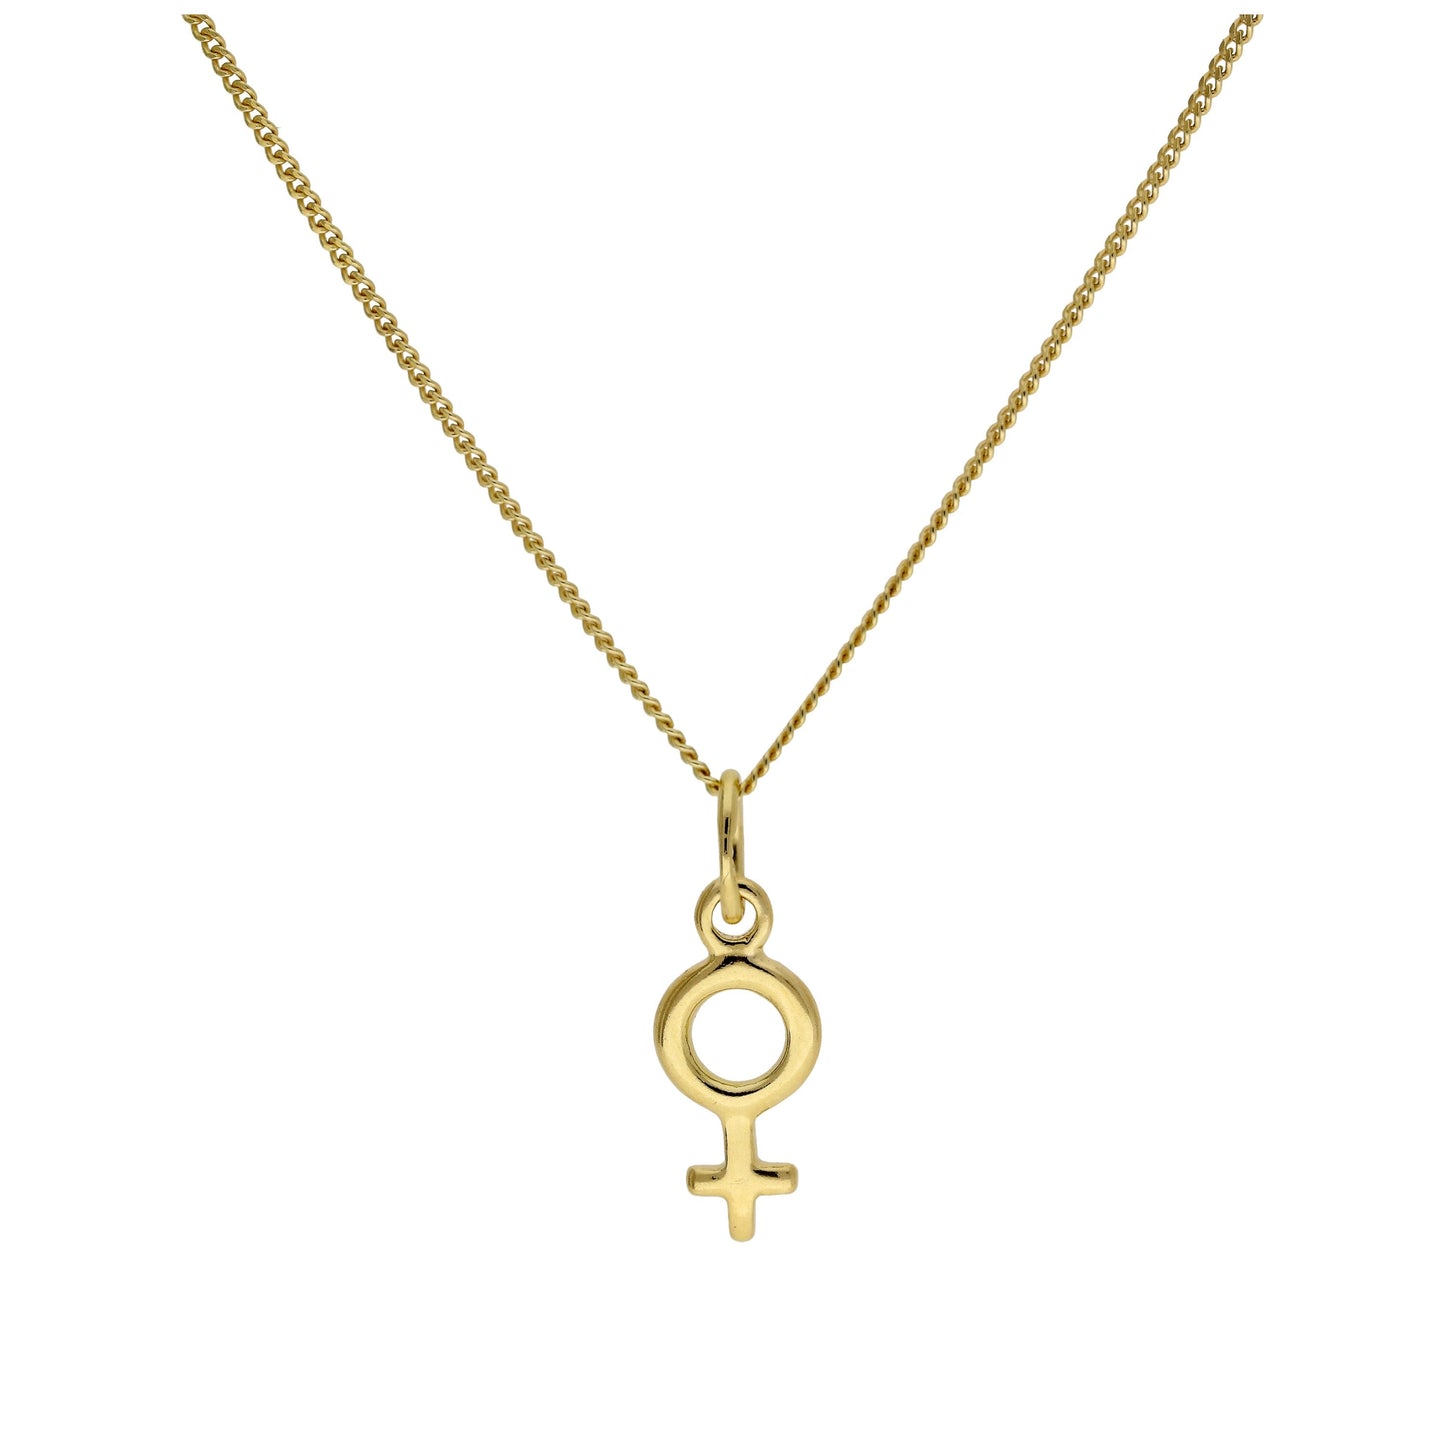 Gold Plated Small Sterling Silver Female Symbol Necklace 14 - 32 Inches